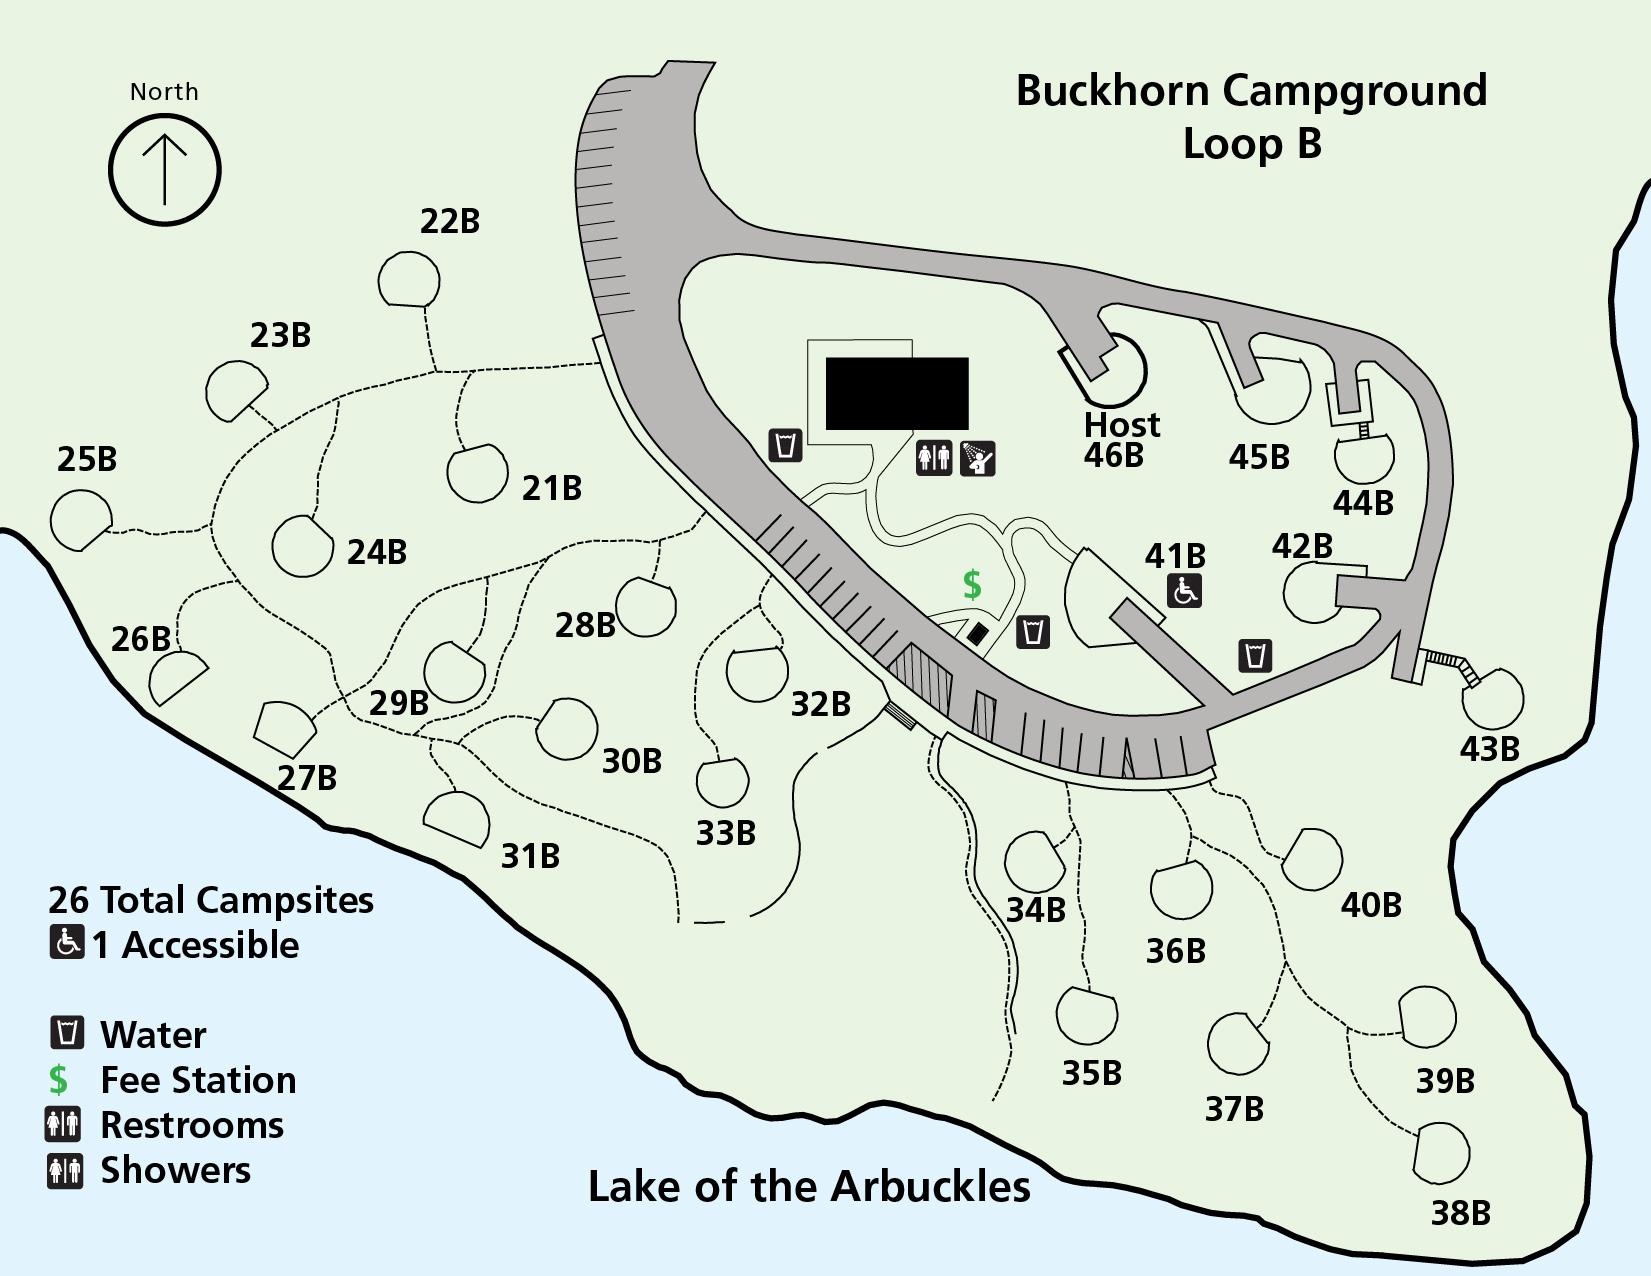 A map of Buckhorn Loop B depicting the relative locations of the restrooms, campsites, and lakeshore